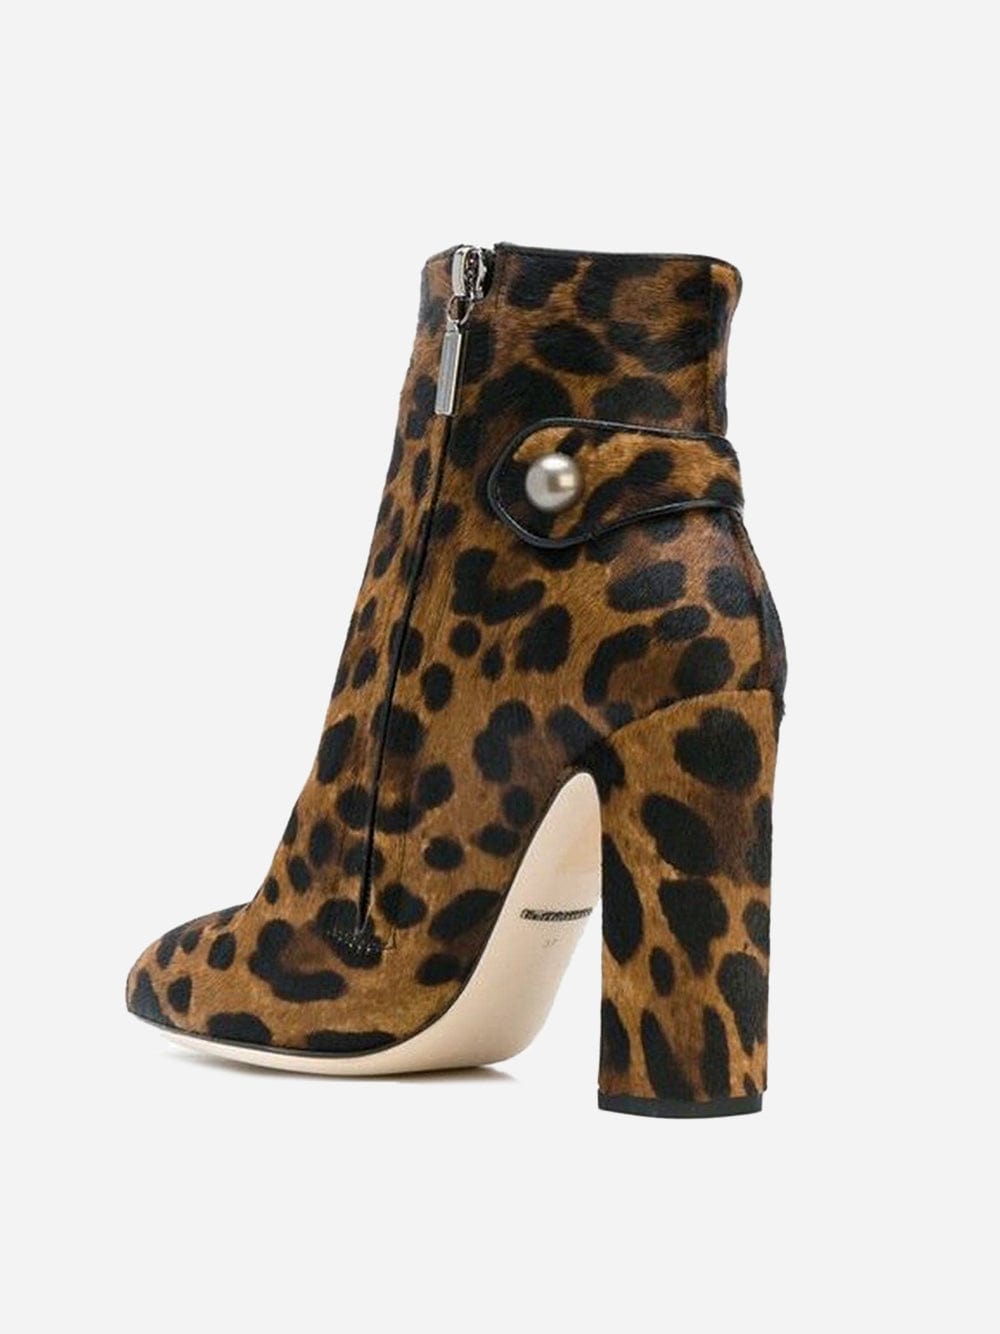 Dolce & Gabbana Vally Leopard-Print Ankle Boots